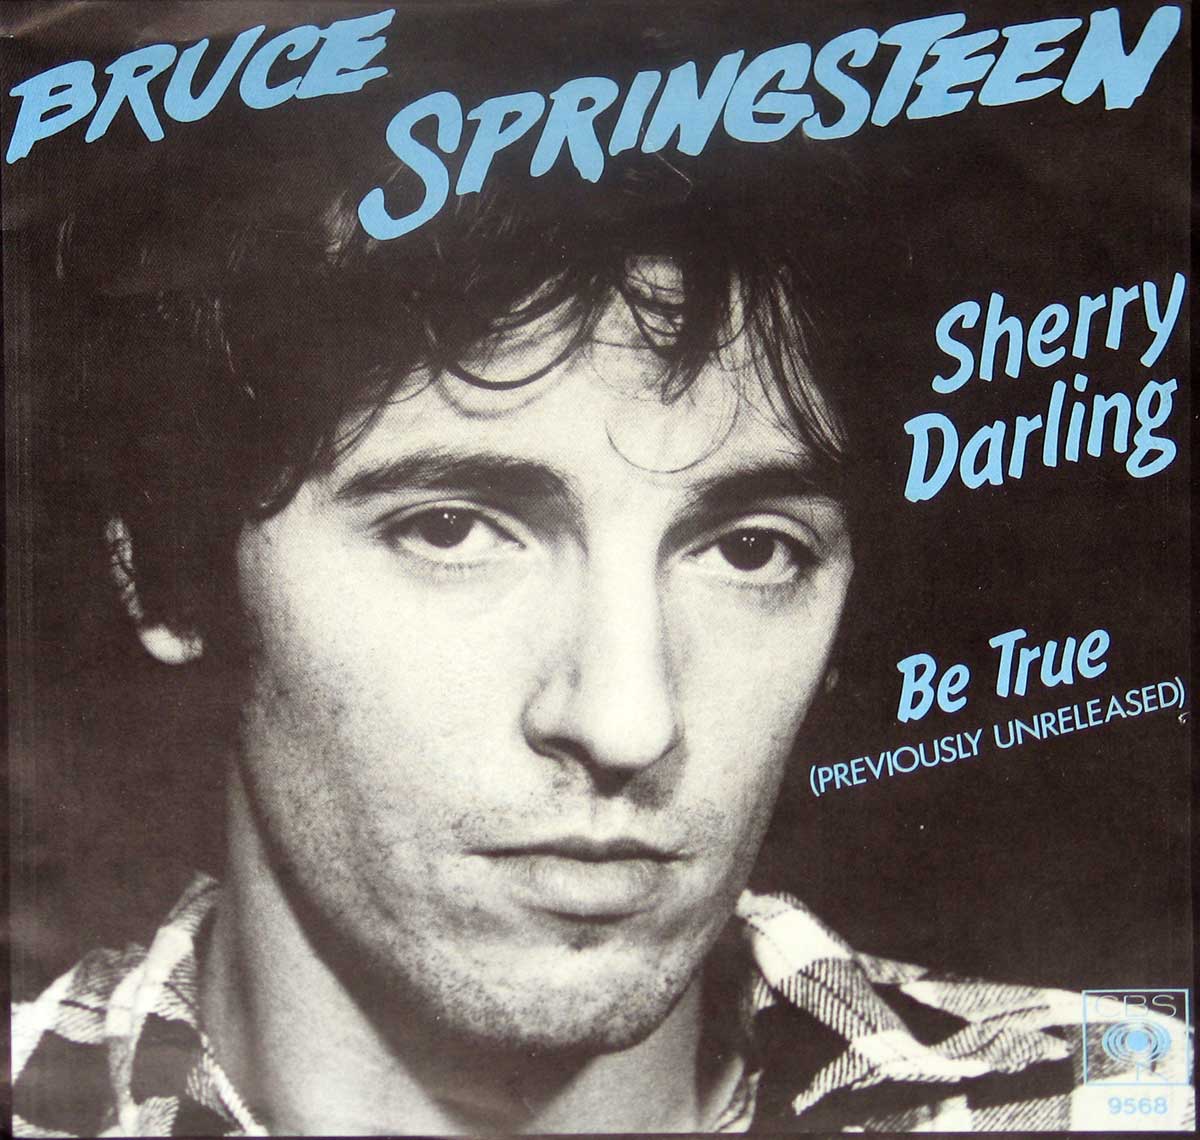 large album front cover photo of: BRUCE SPRINGSTEEN Sherry Darling 